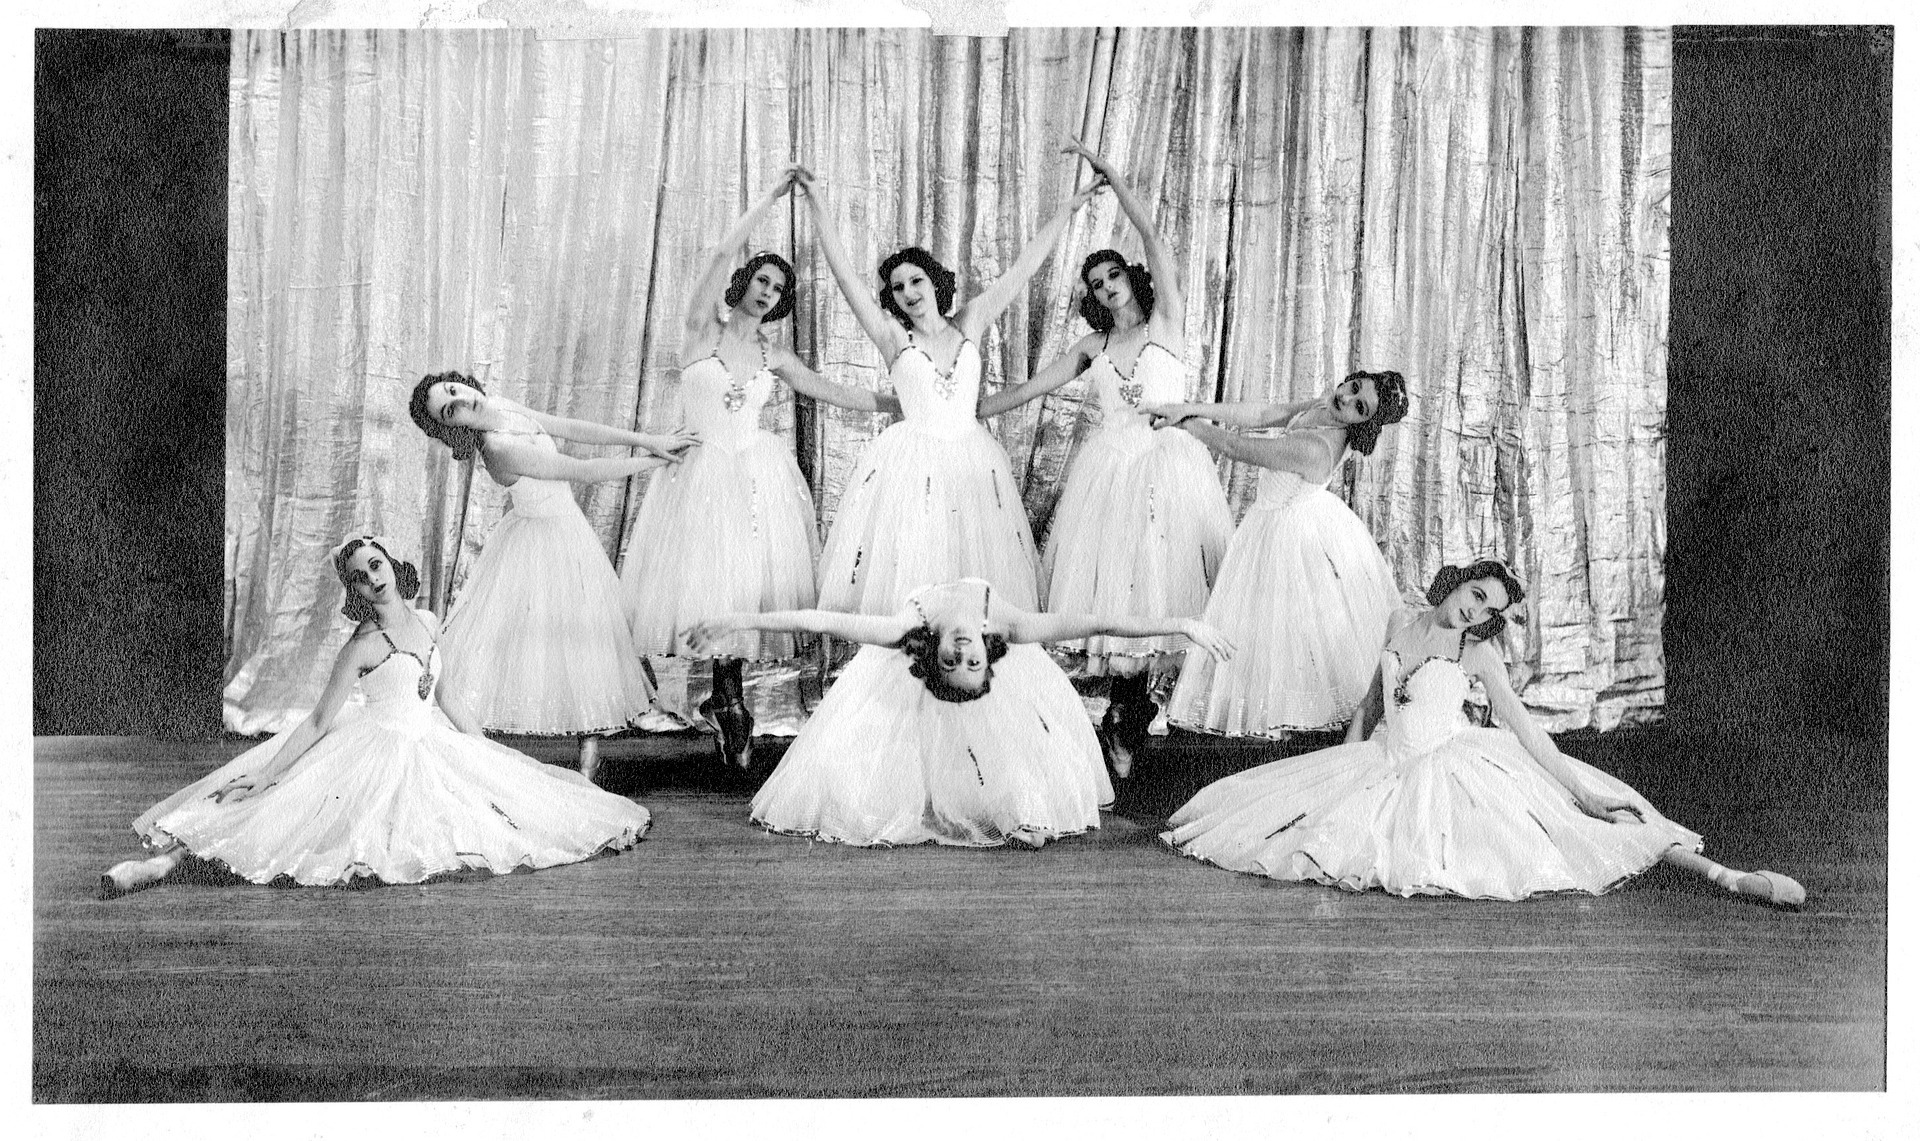 The History of the Dance Recital